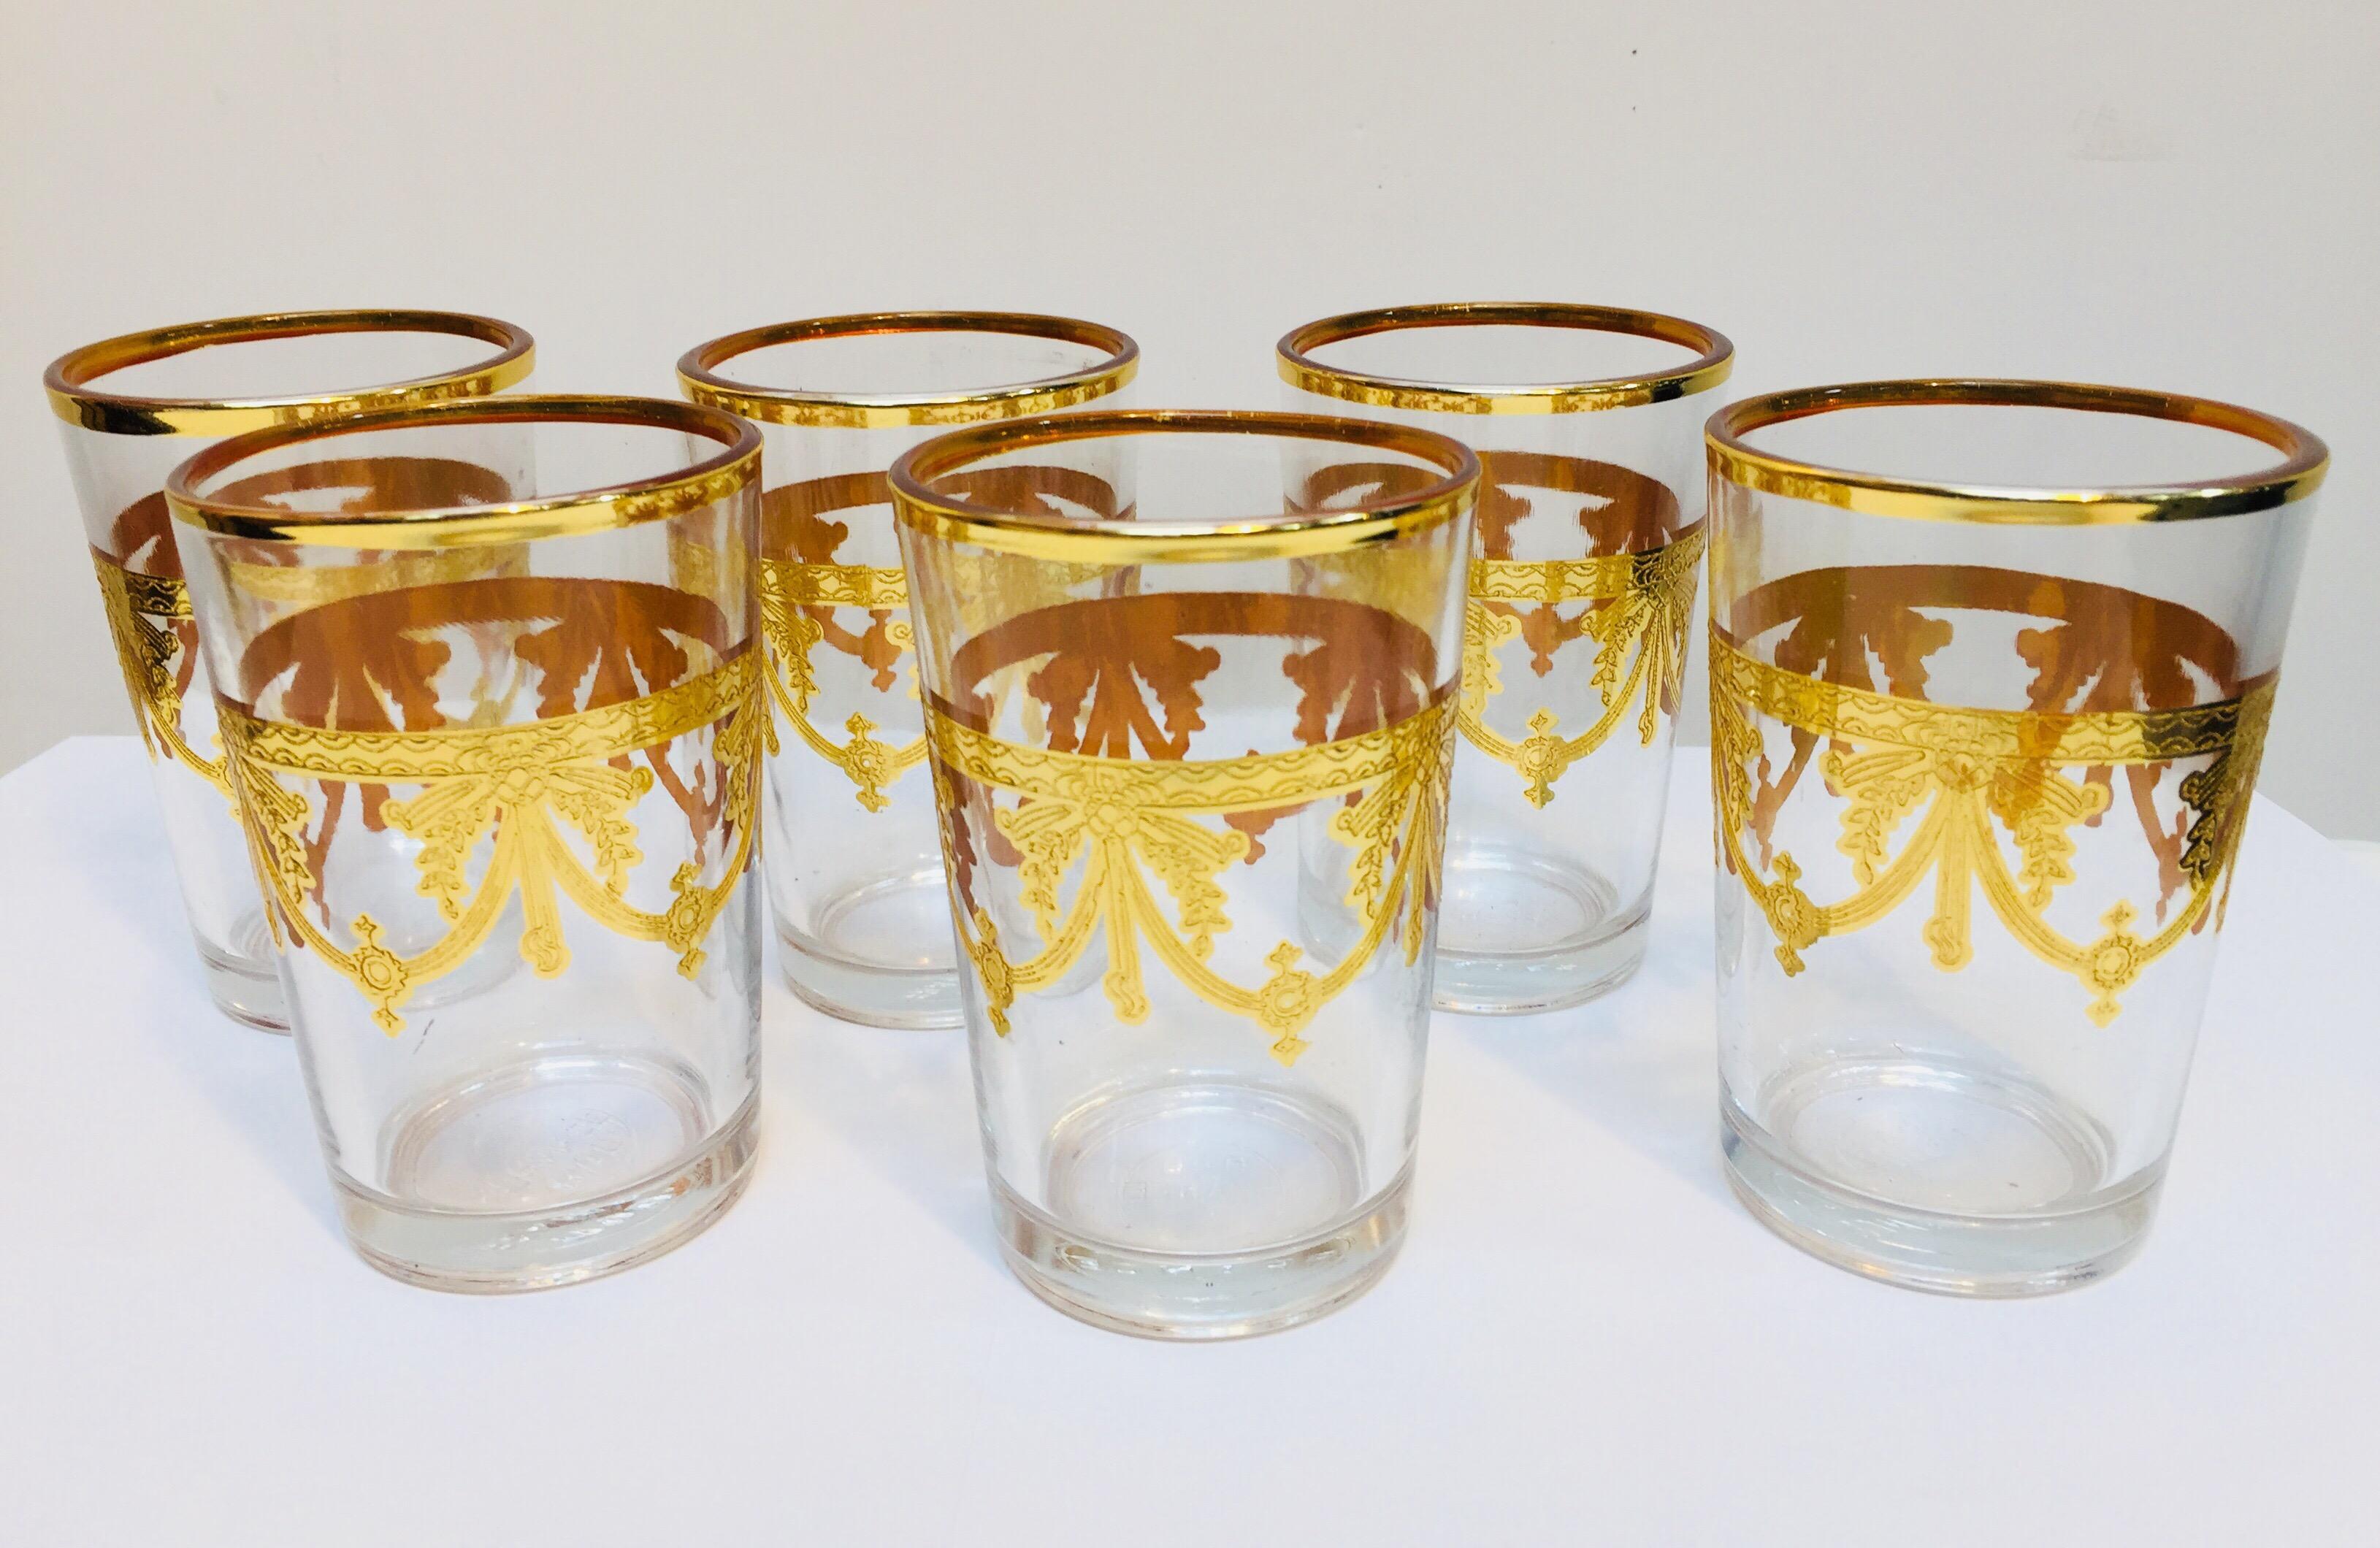 Set of six Moorish glasses with gold raised overlay design
Decorated with a classical gold pattern frieze.
Use these elegant glasses for Moroccan tea, or any hot or cold drink.
In fantastic condition, perfect for the holidays and gorgeous on display